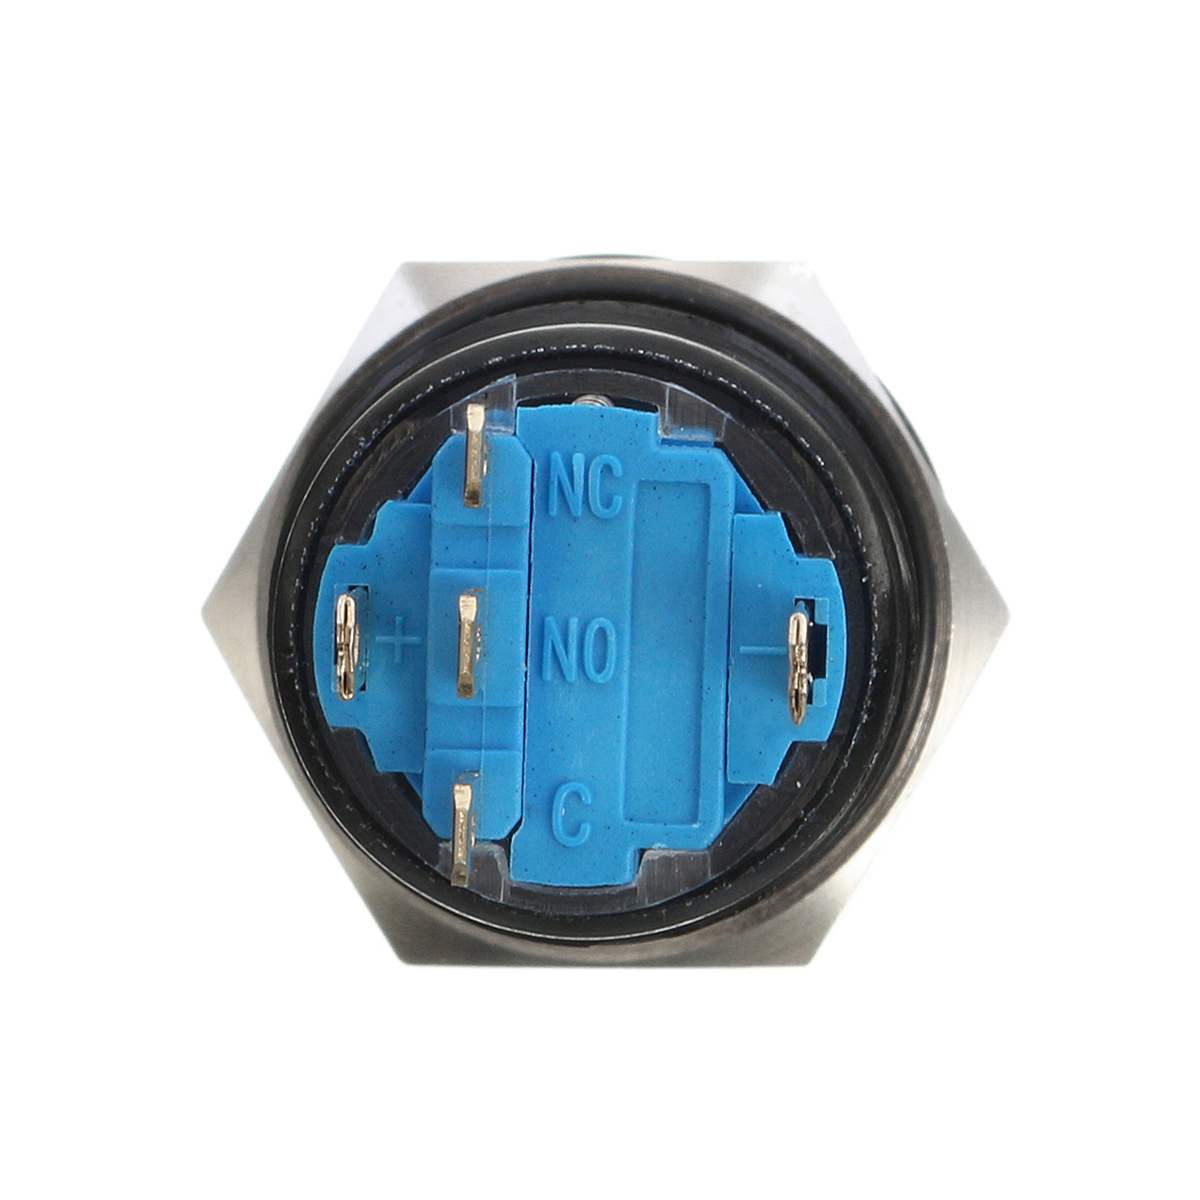 19mm-12V-5-Pin-Led-Light-Metal-Push-Button-Momentary-Switch-1161648-5